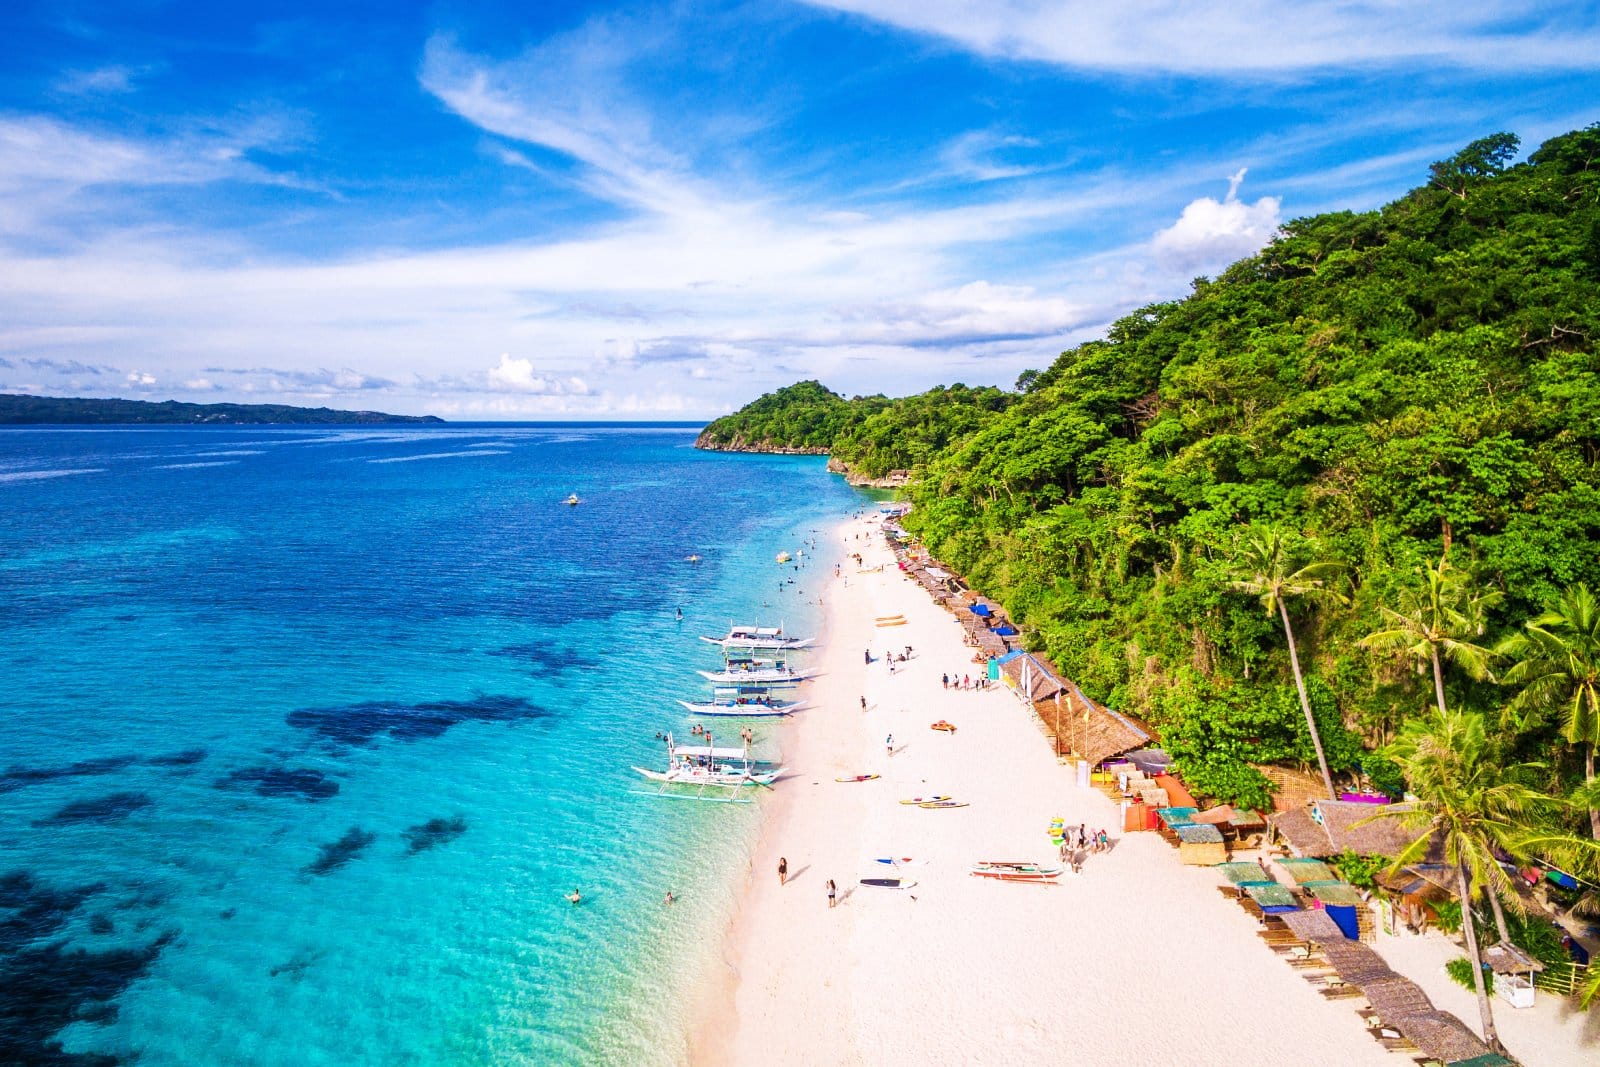 <p class="wp-caption-text">Image Credit: Shutterstock / R.M. Nunes</p>  <p><span>Boracay, a small island in the central Philippines, is famed for its stunning White Beach, vibrant nightlife, and a plethora of water sports. However, beyond its party reputation lies a tranquil side, with serene beaches like Diniwid and Puka Shell Beach, offering a more relaxed atmosphere. The island’s recent rehabilitation efforts have restored its natural beauty, making it a more sustainable destination for travelers.</span></p>